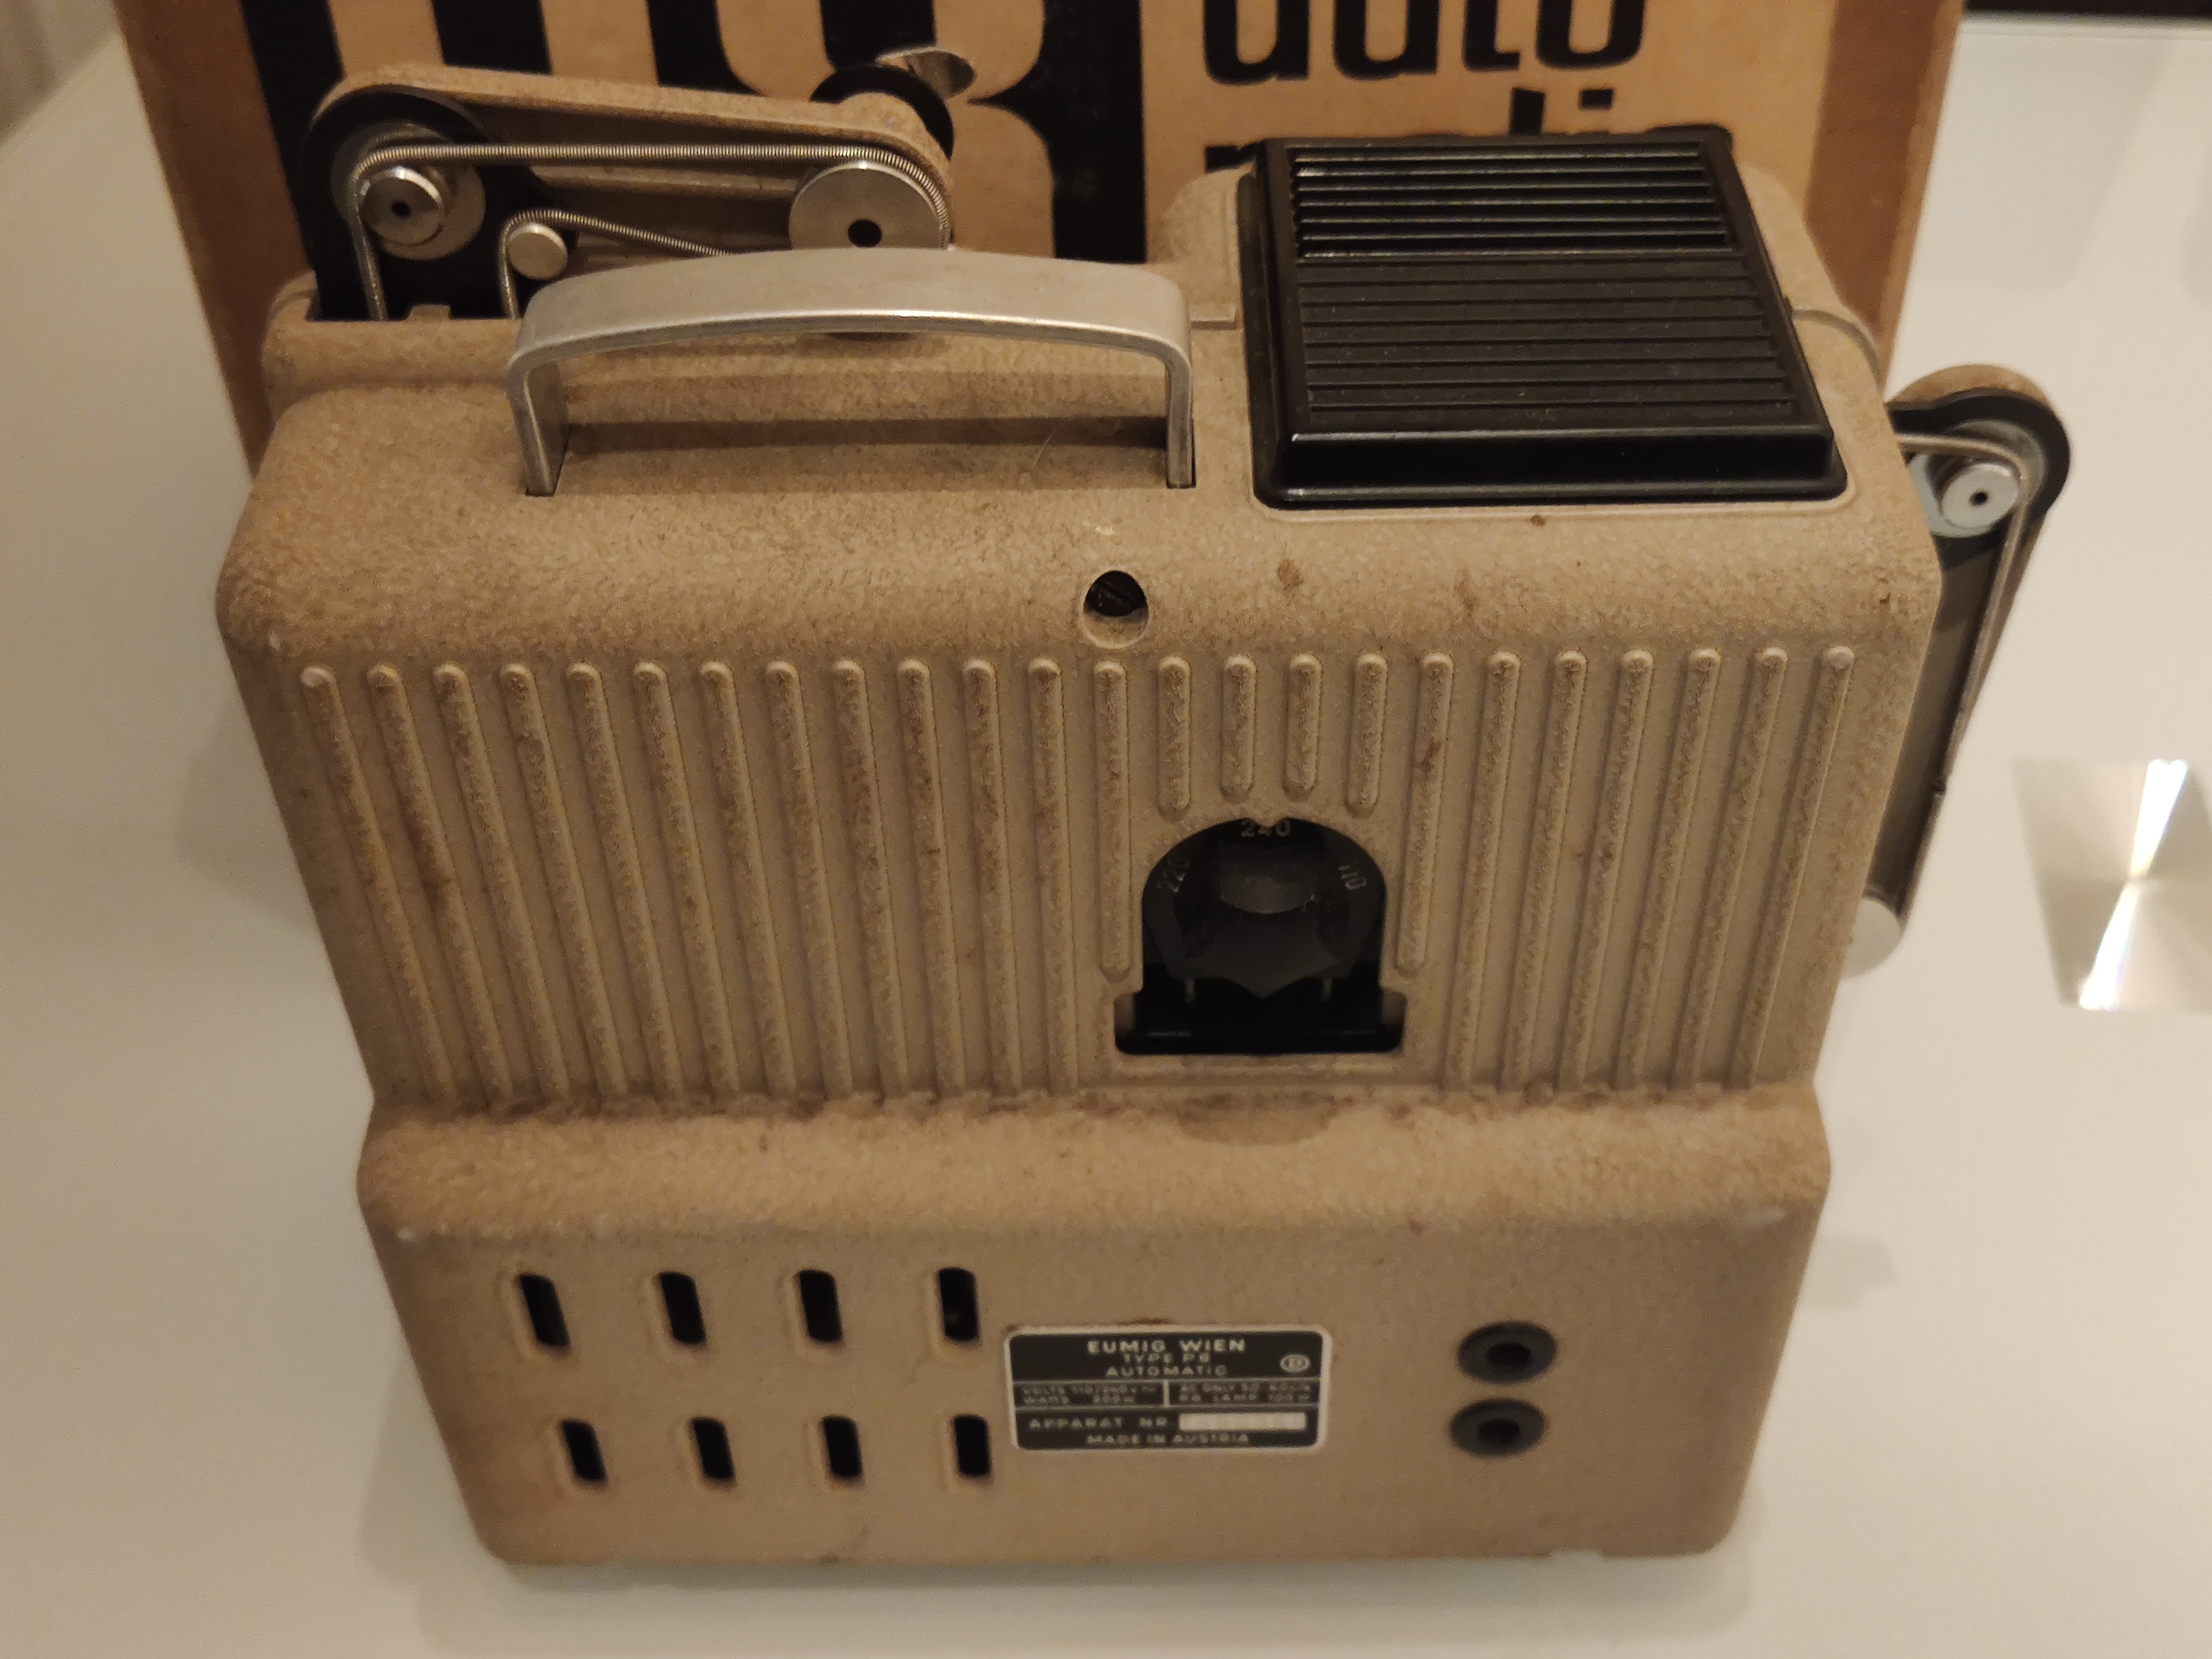 A Eumig P8 Automatic Projector In Its Original Box With Power Lead Etc and A Japanese Film Slicer... - Image 2 of 6